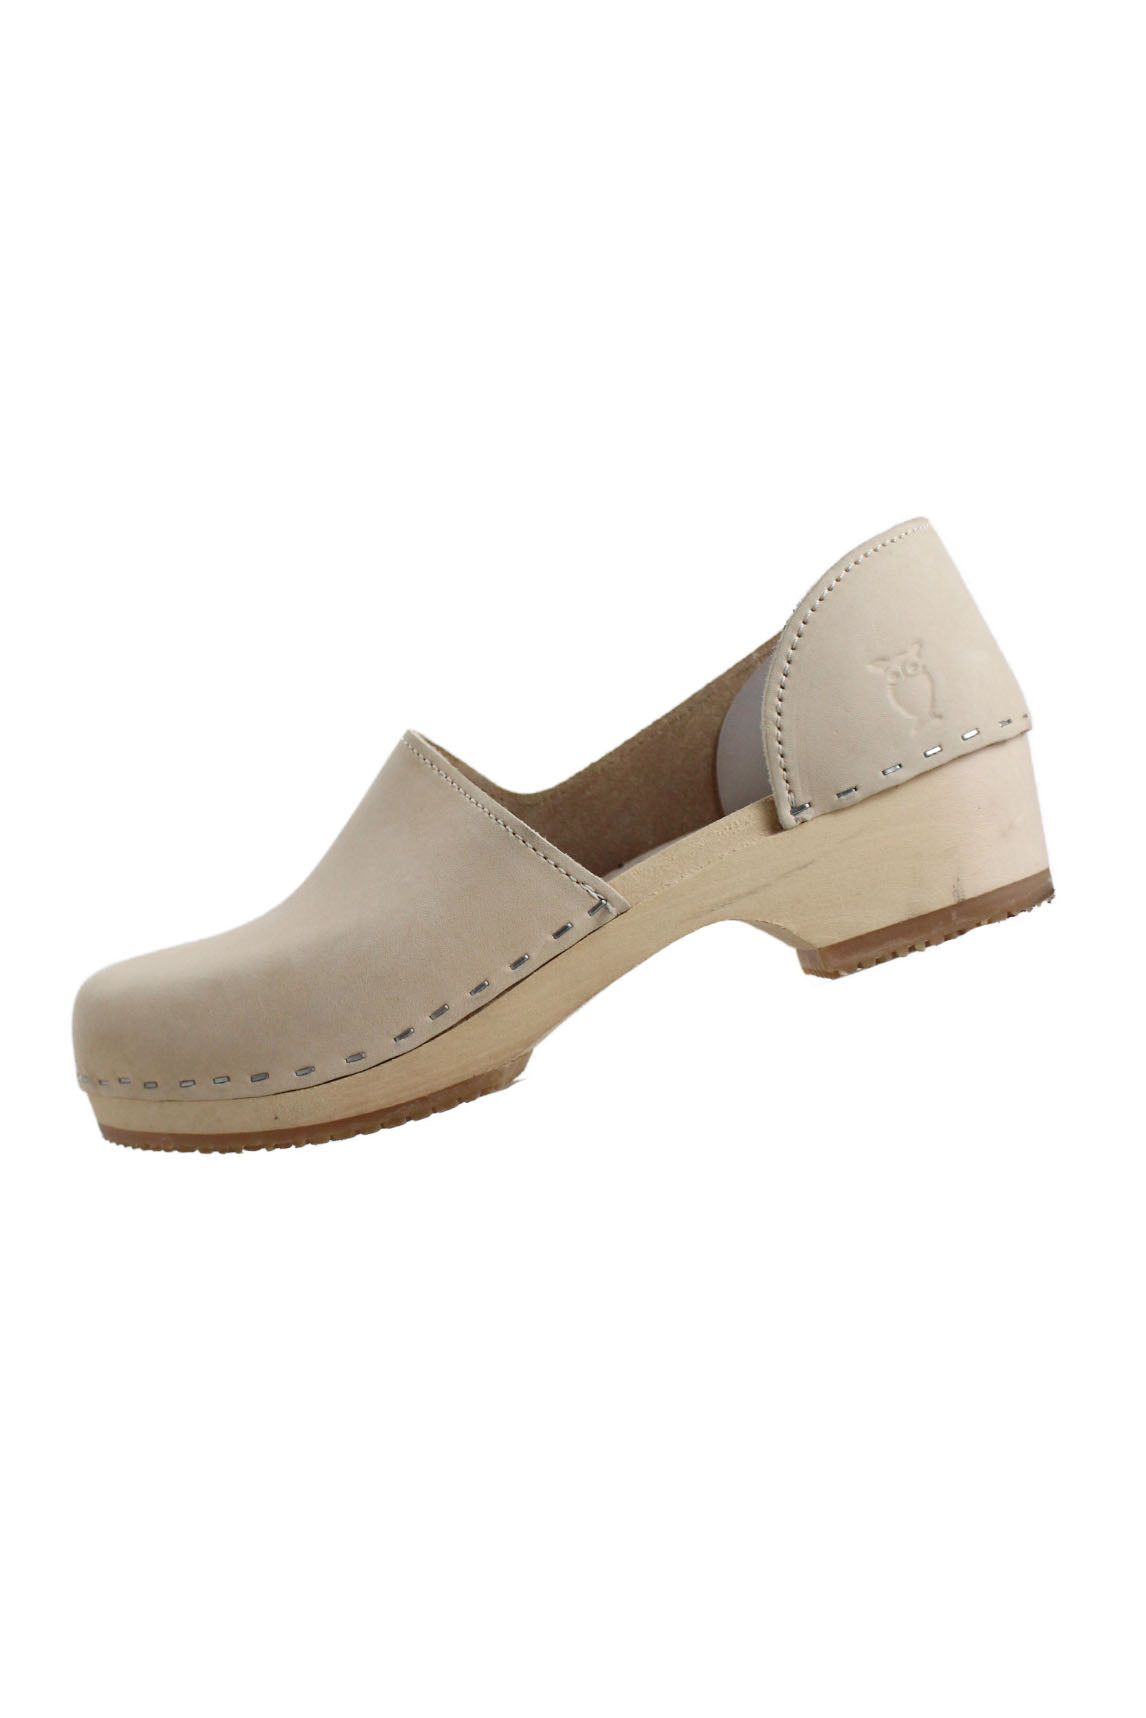 profile of sandgrens beige heeled clogs. features contrast stitching, rounded toe, embossed logo brand at outer side, rubber sole, and slip on style. 